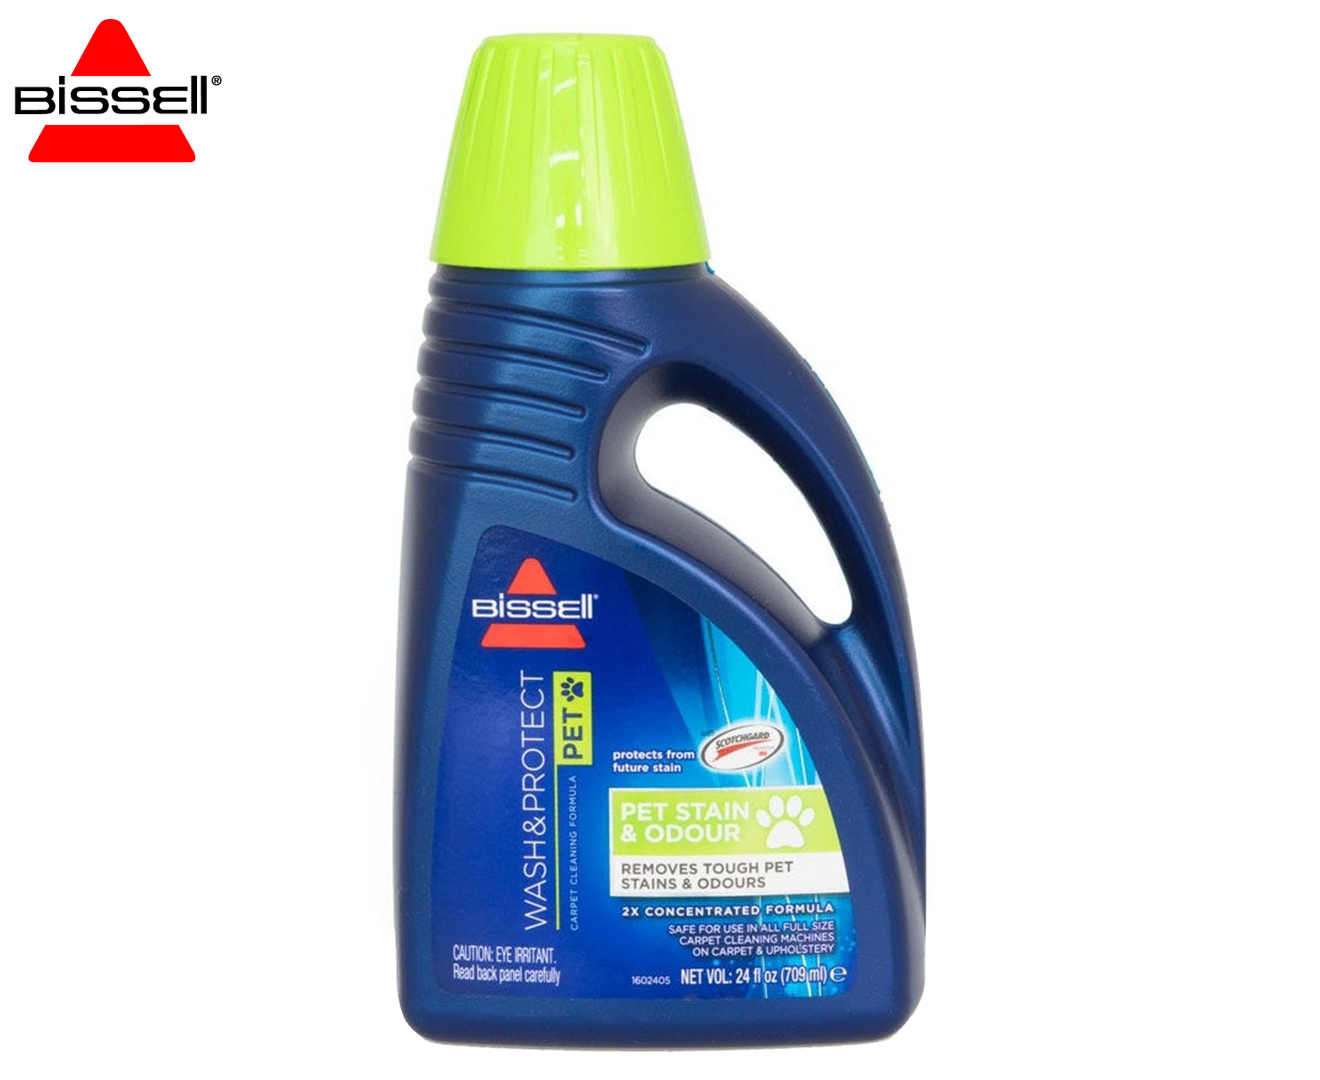 Bissell Wash & Protect Pet Stain & Odour Carpet Cleaning Formula